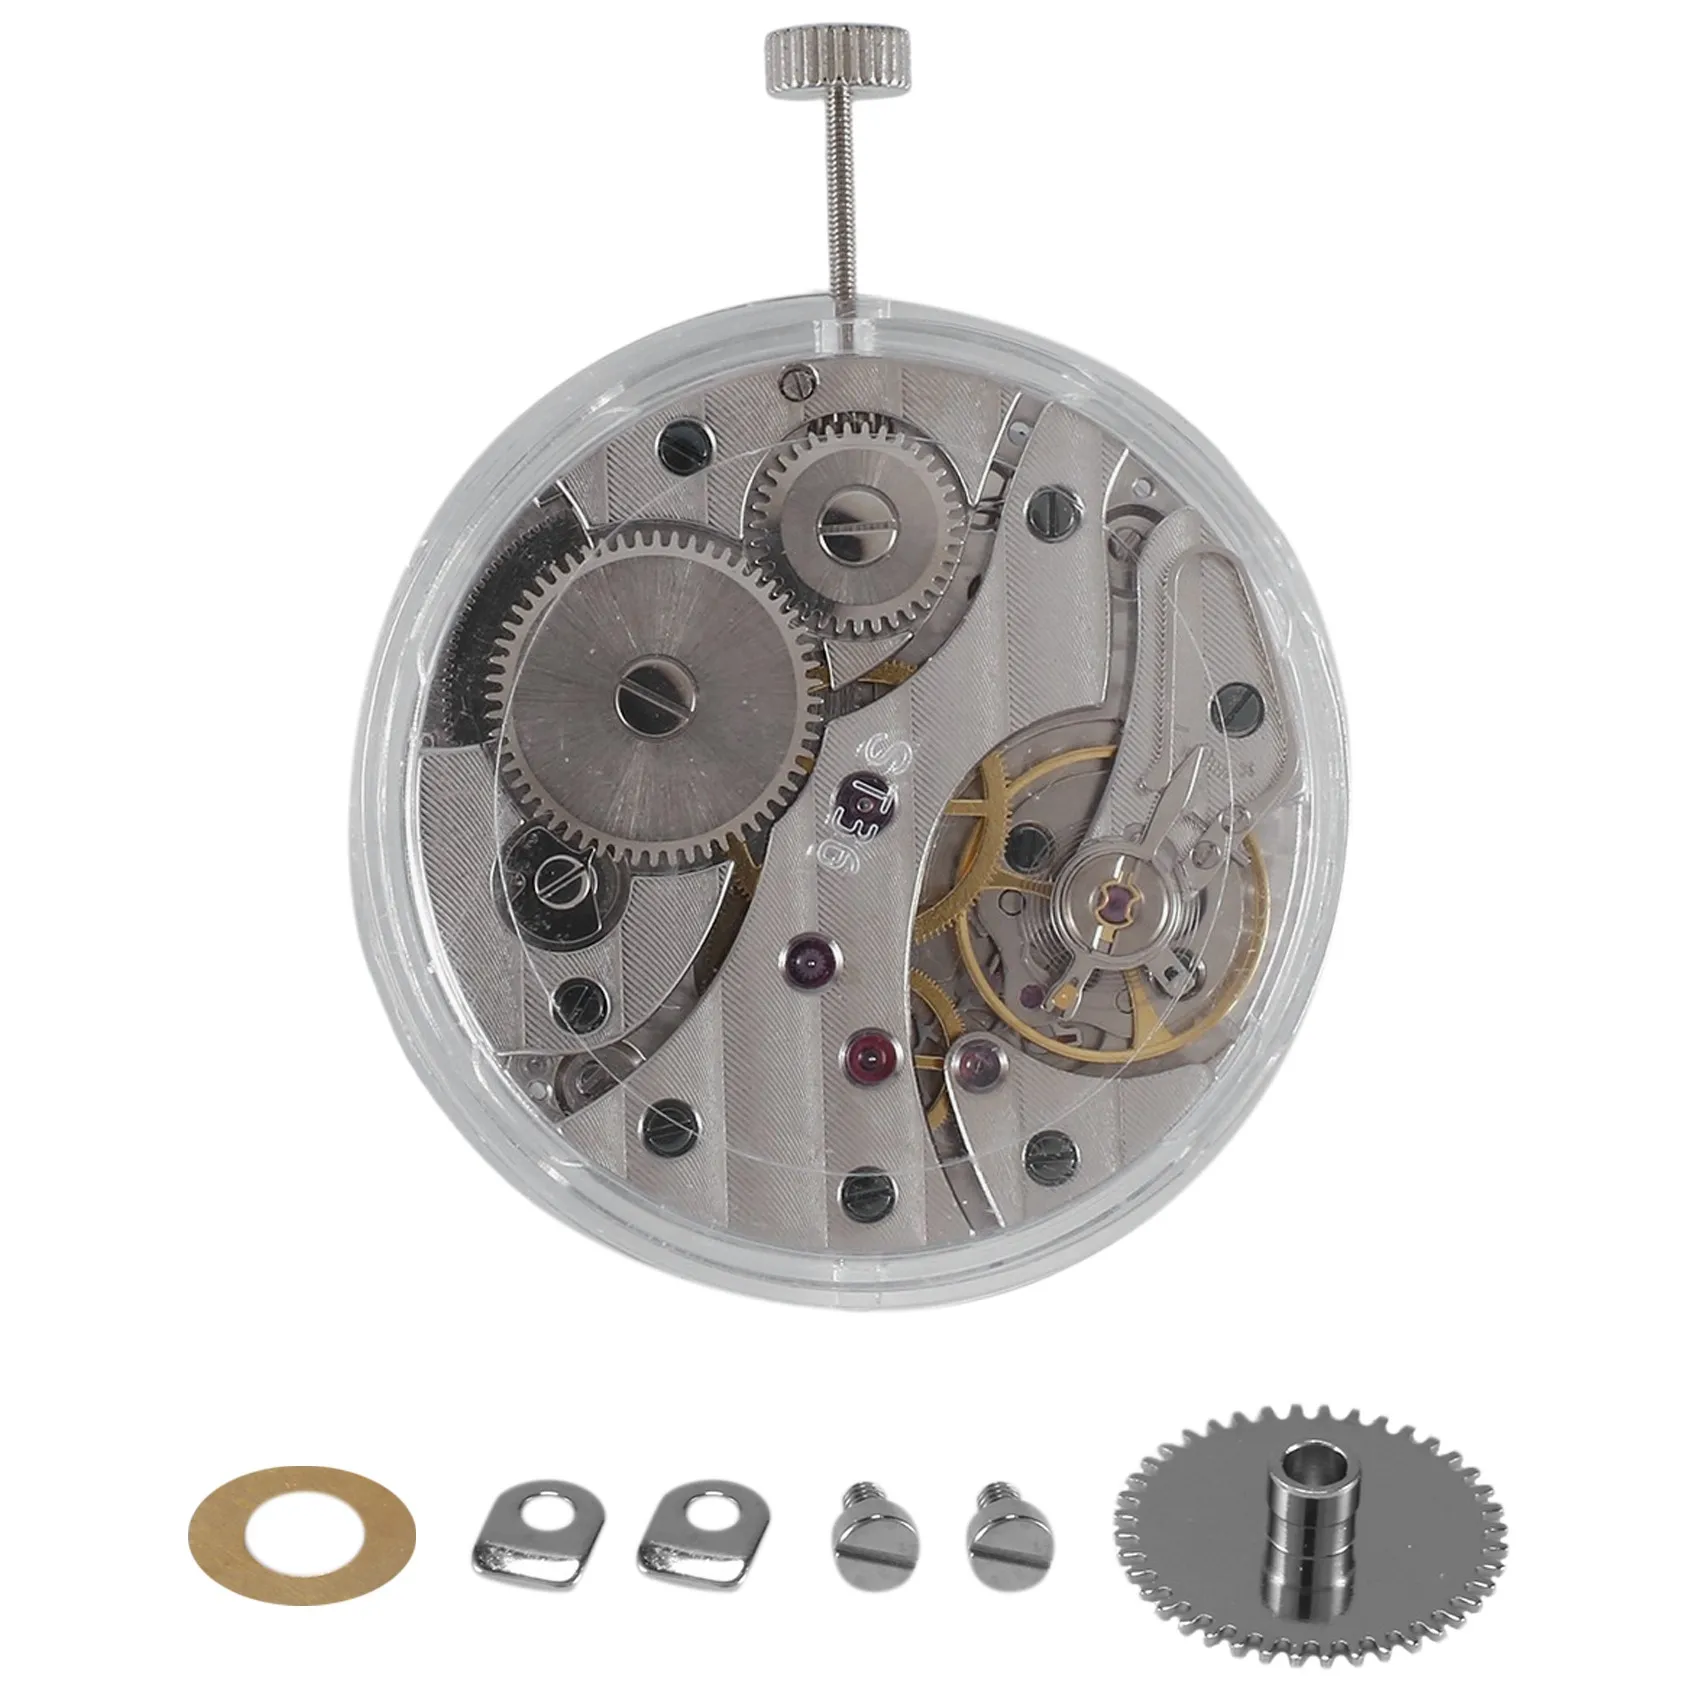 

Watch Accessories Seagull ST3601 Homemade 6497 Movement Fine Tuning Manual Up-Chain Two-Pin Semi-Mechanical Movement